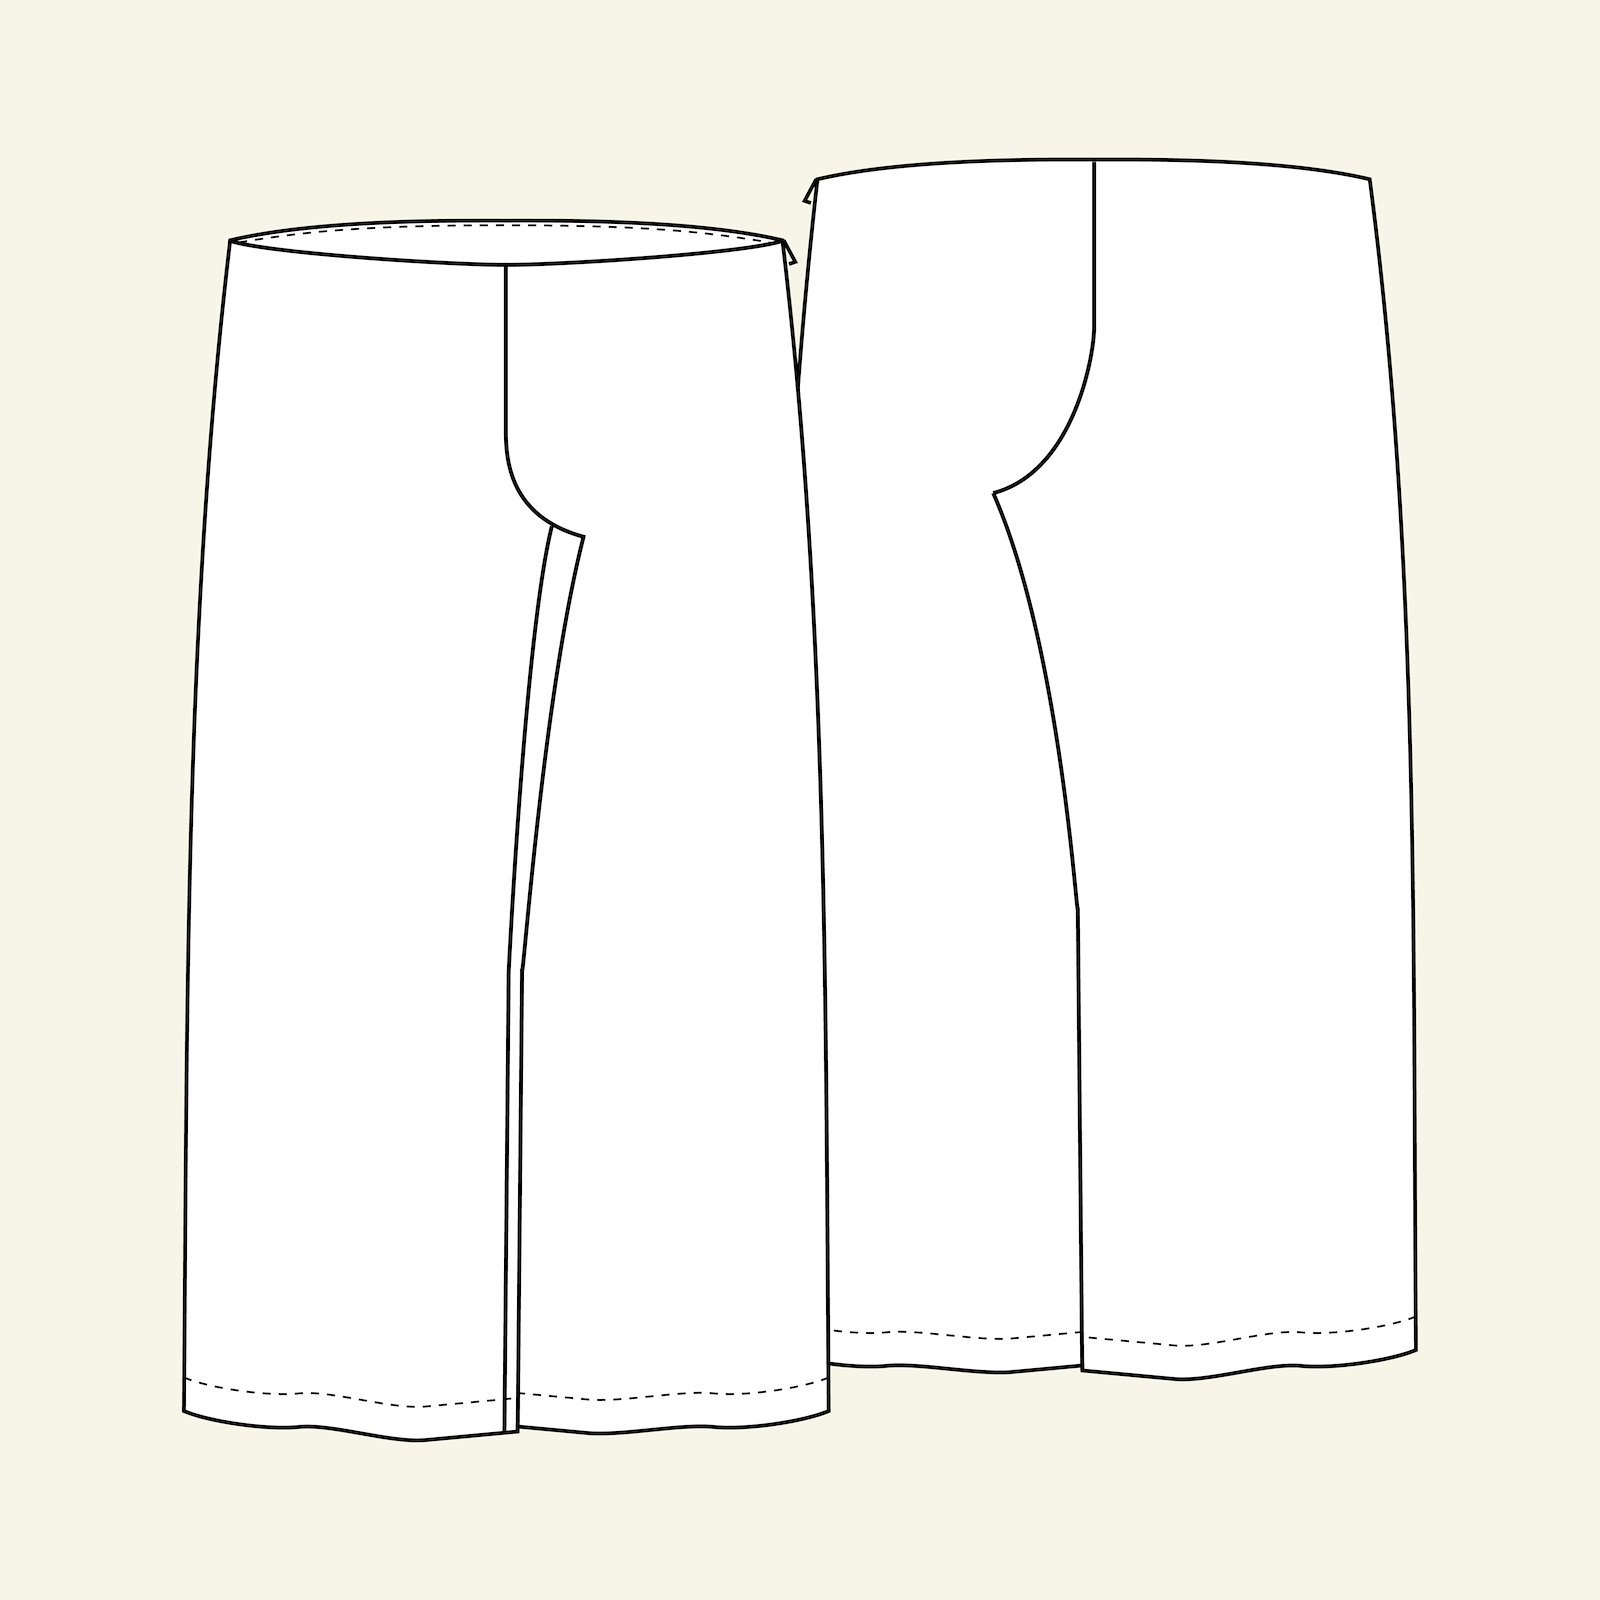 Boot cut trousers, 48/20 p70005_pack